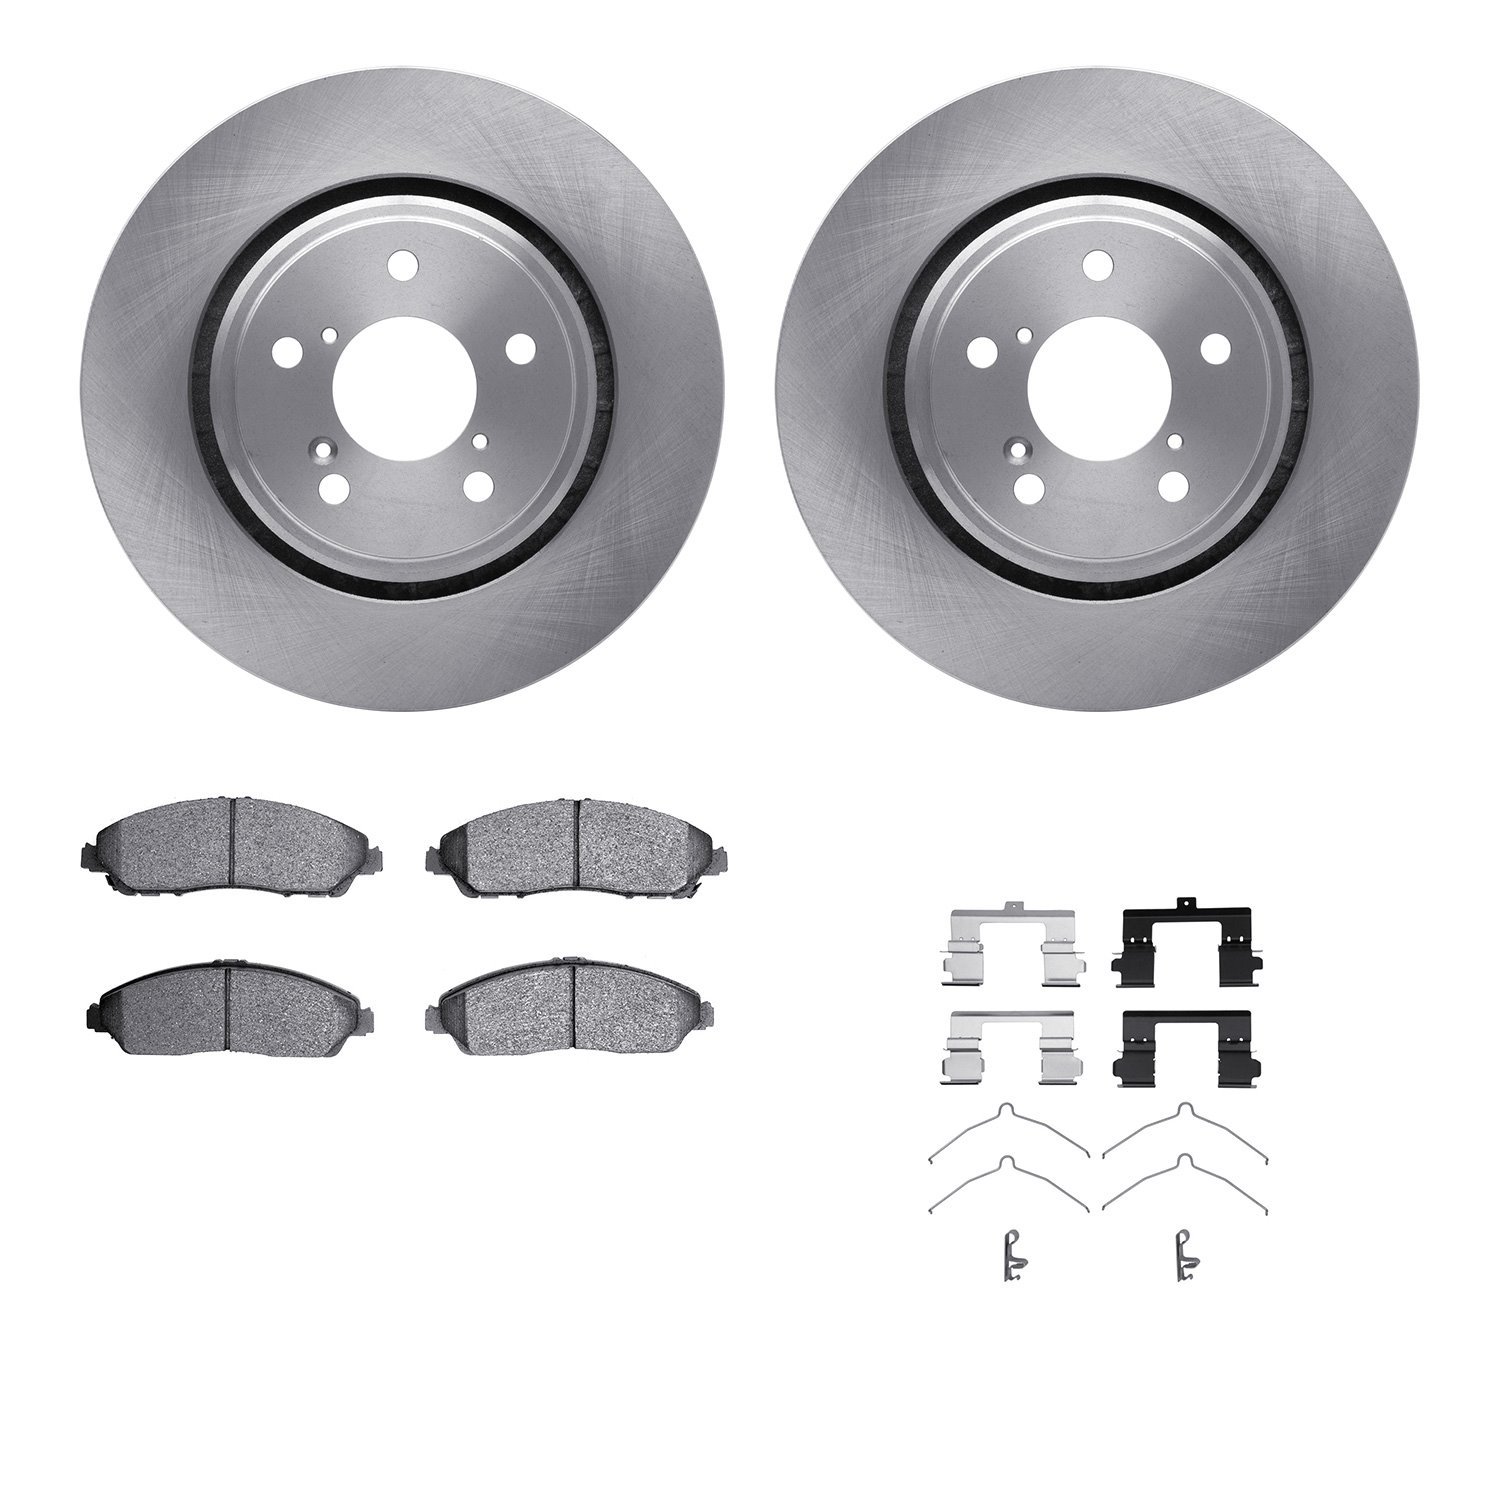 6312-59101 Brake Rotors with 3000-Series Ceramic Brake Pads Kit with Hardware, Fits Select Acura/Honda, Position: Front